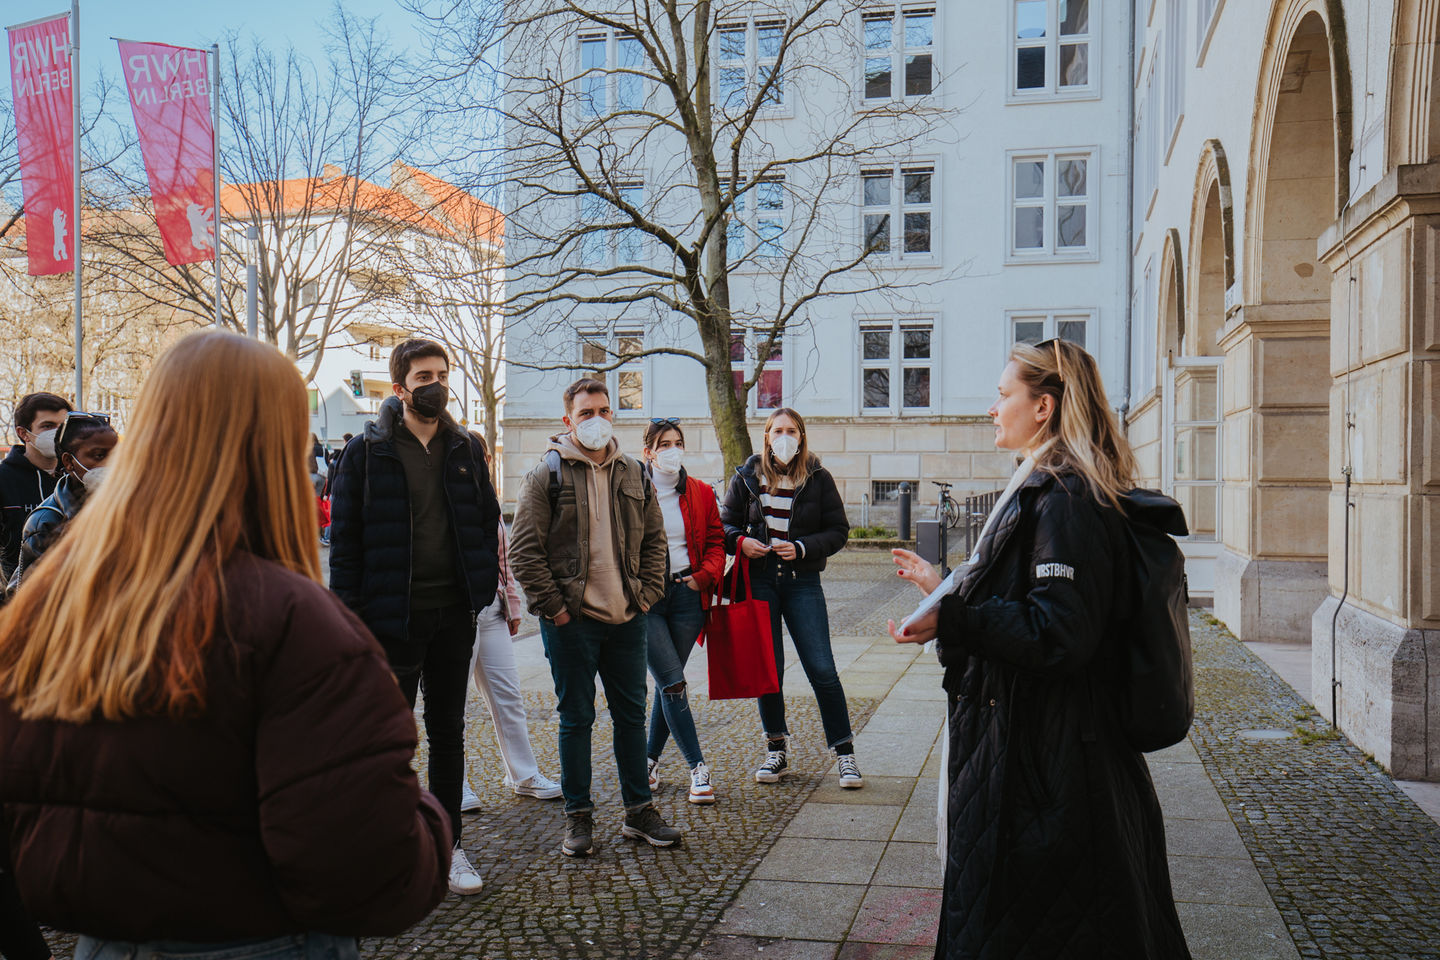 Campus tour of altogether 300 exchange students from 39 different nations at the HWR Berlin in March 2022. Photo: Oana Popa-Costea